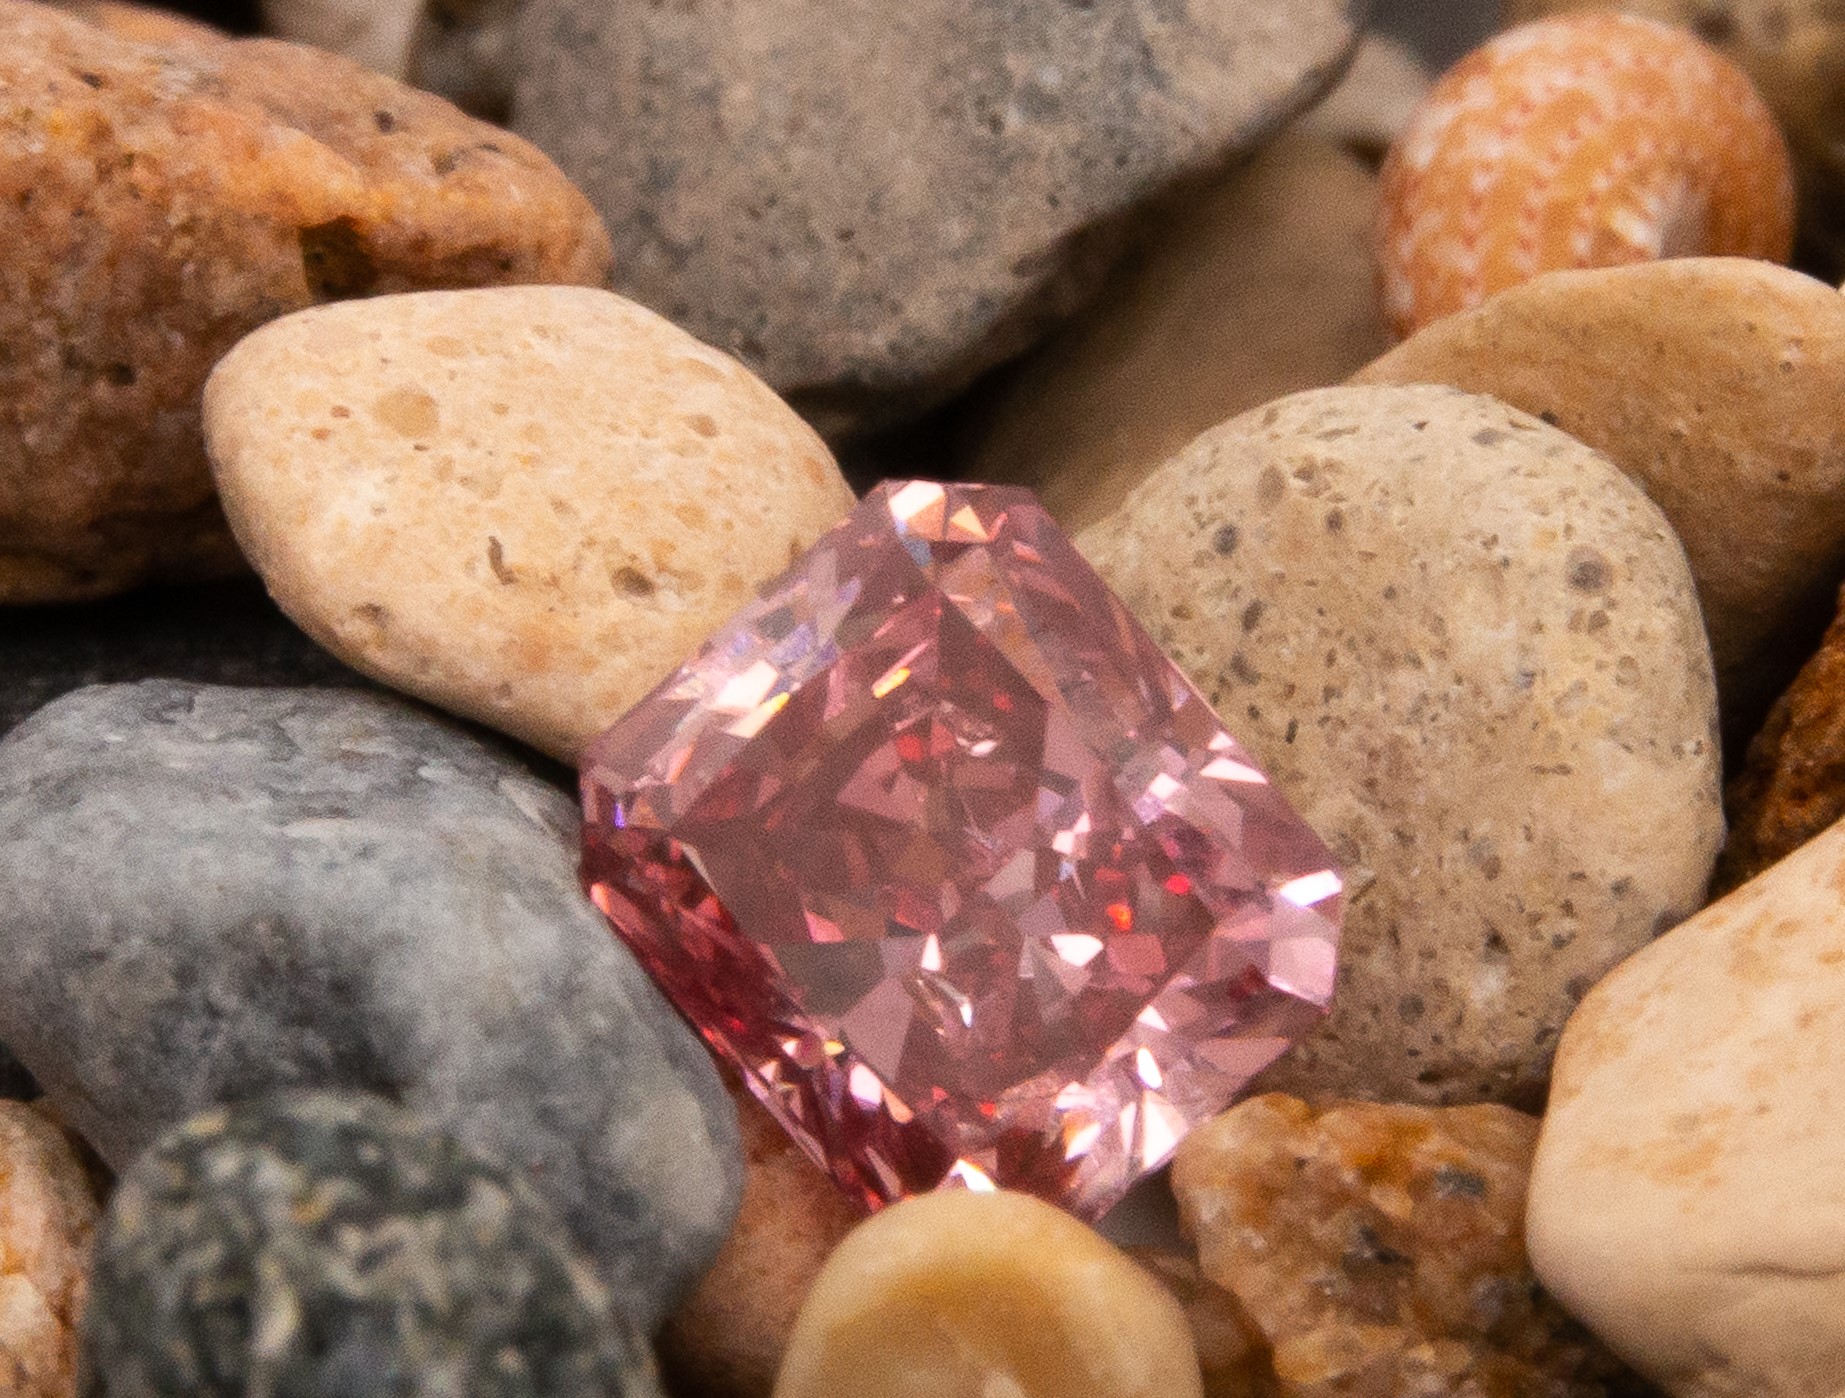 Is bigger better? 2022’s massive Pink Diamond discovery.